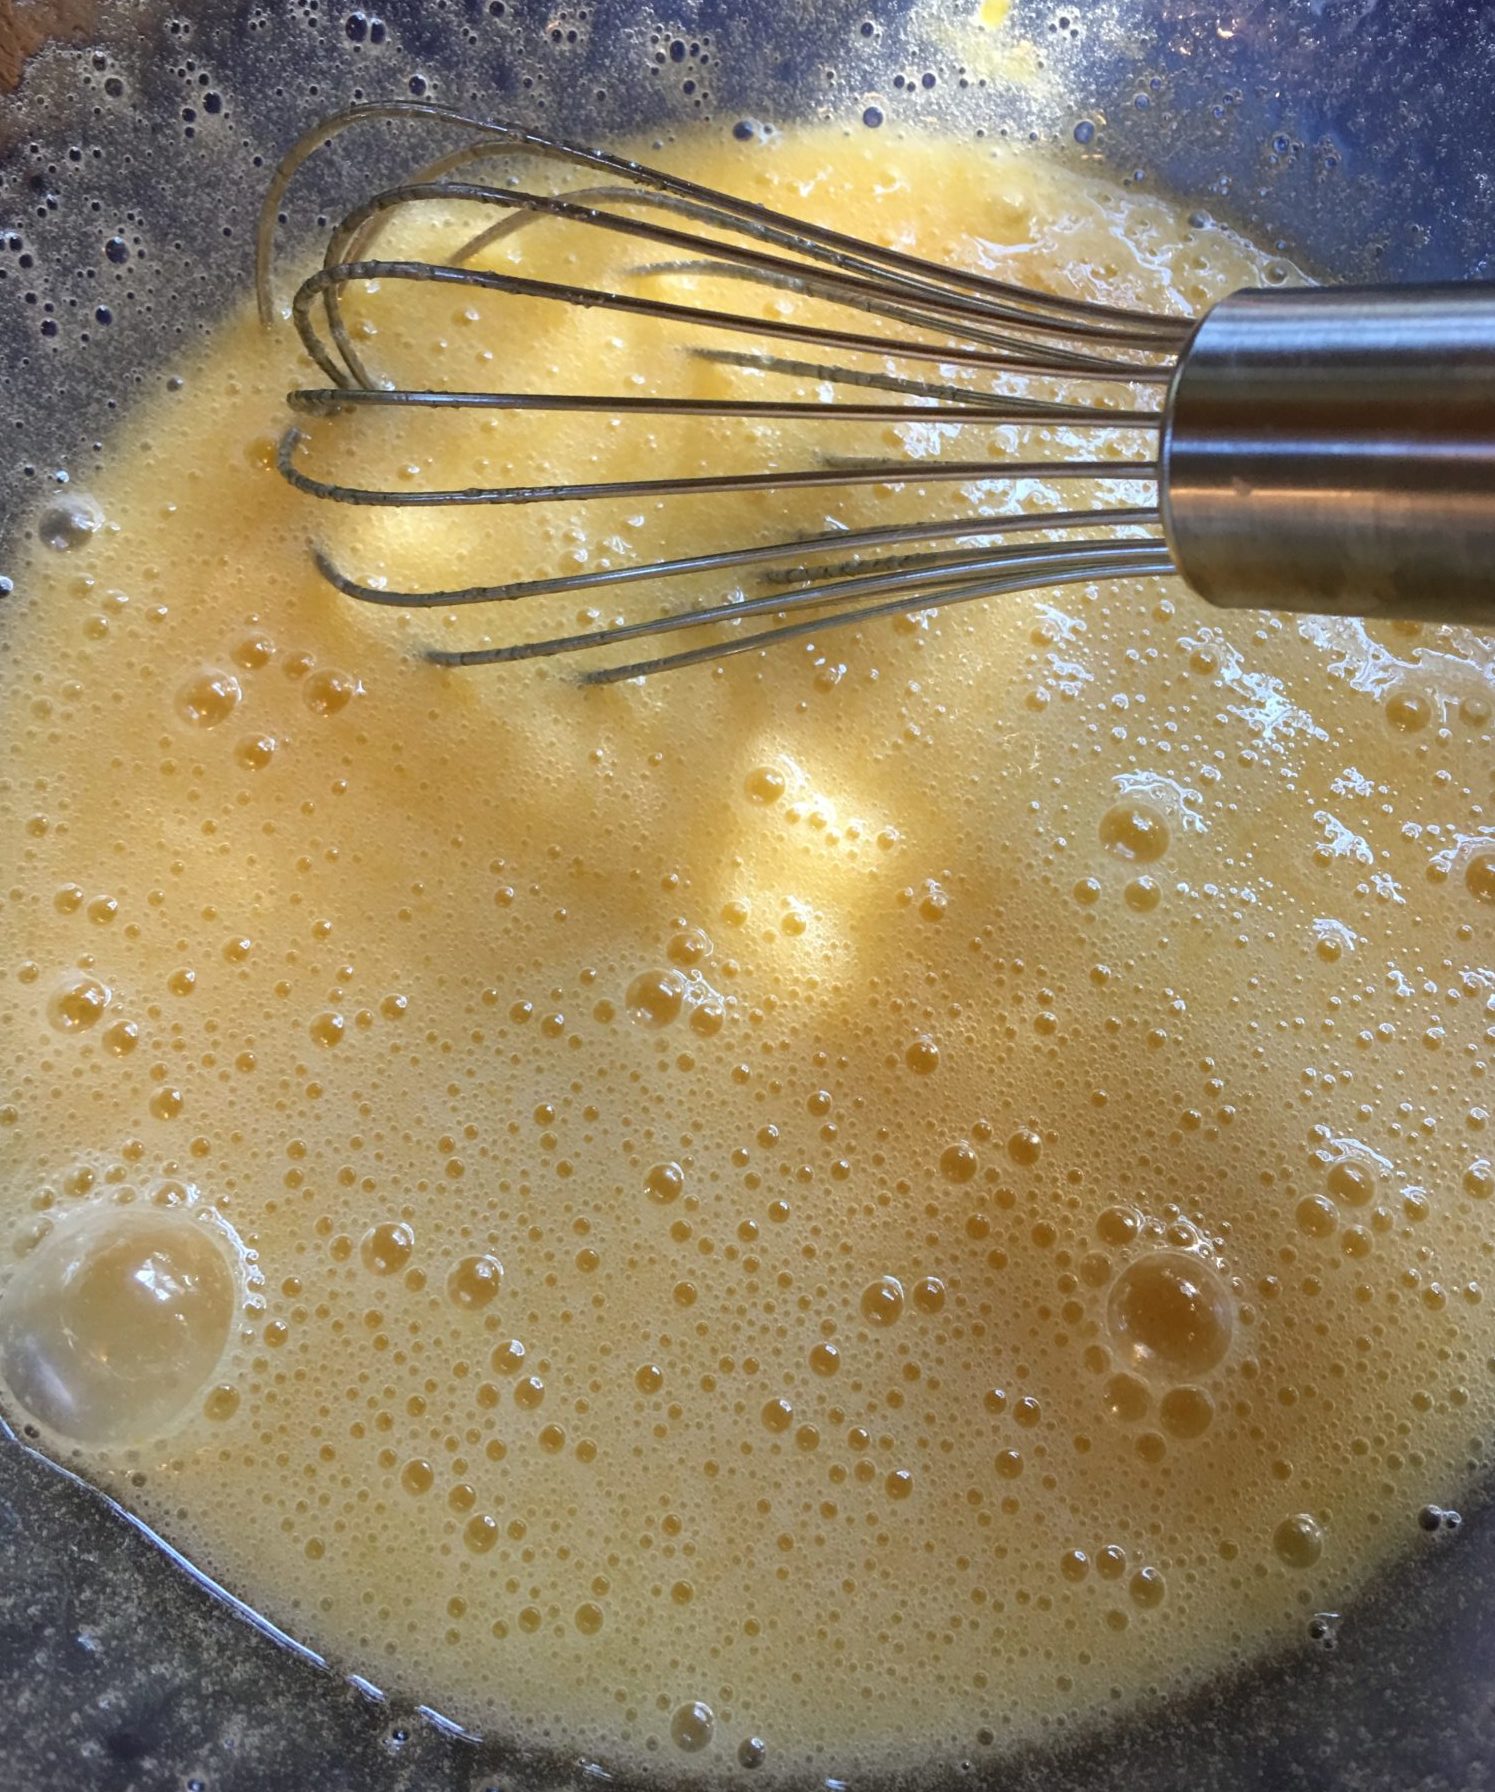 Mixed oil, eggs and sugar